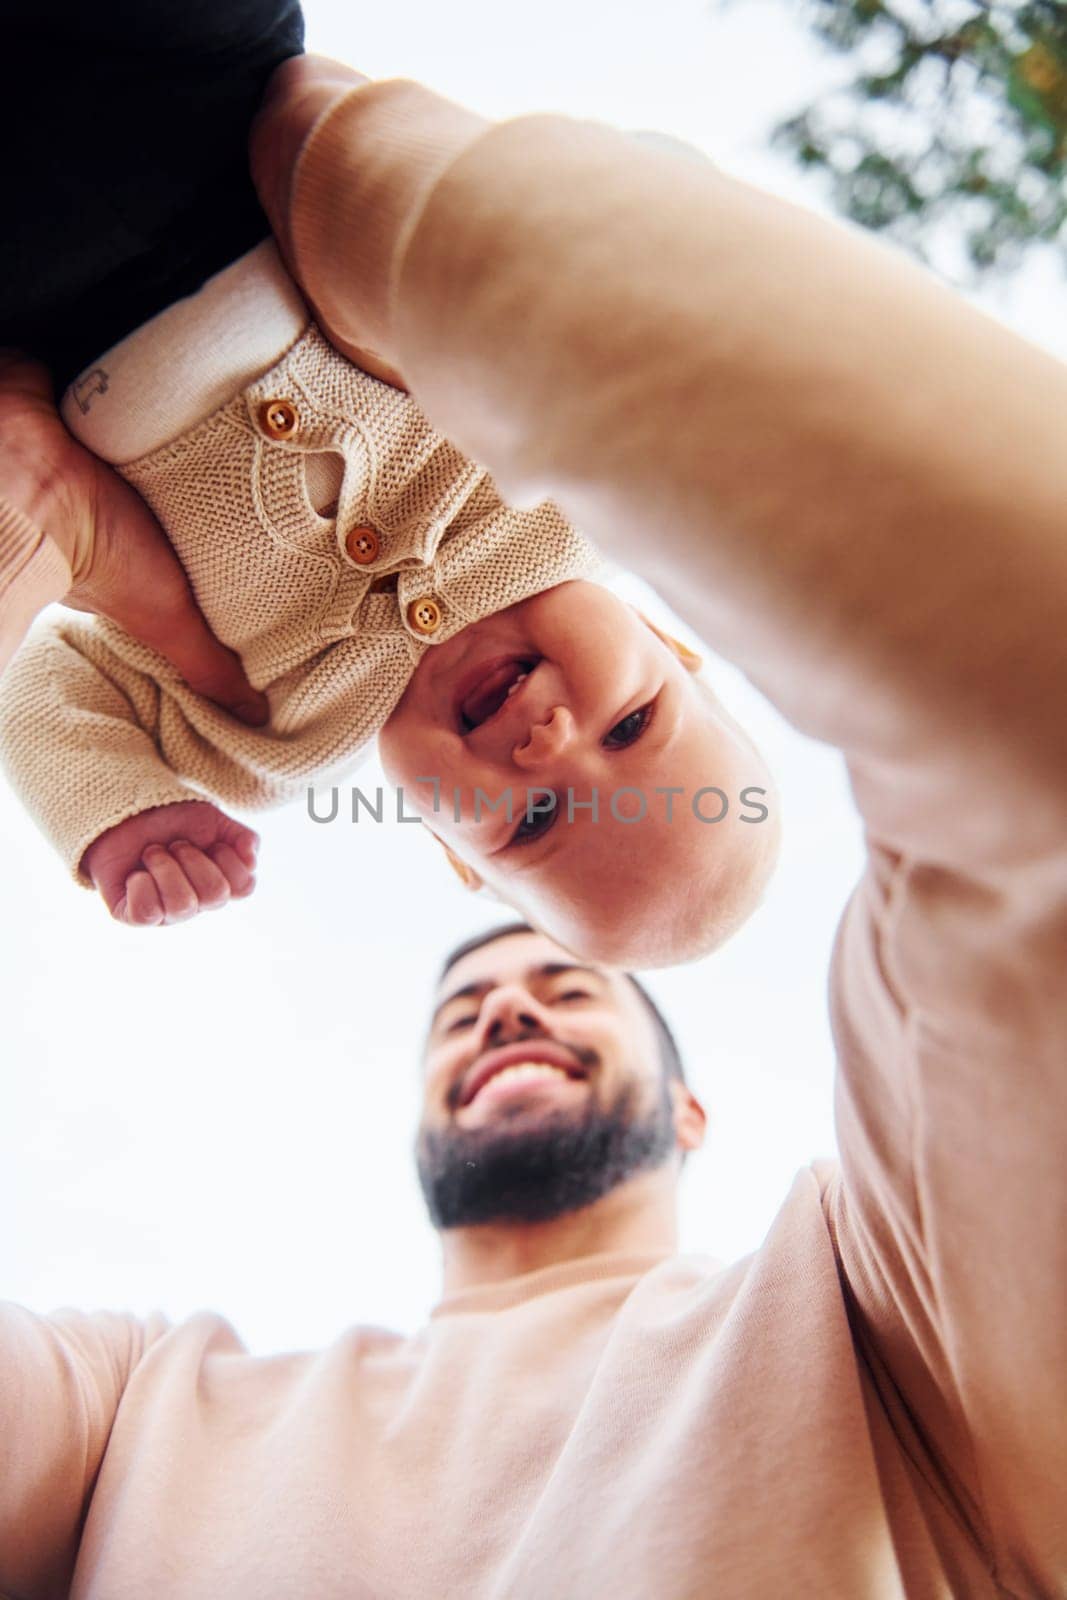 Bearded father playing with his child outdoors at sunny daytime outdoors.